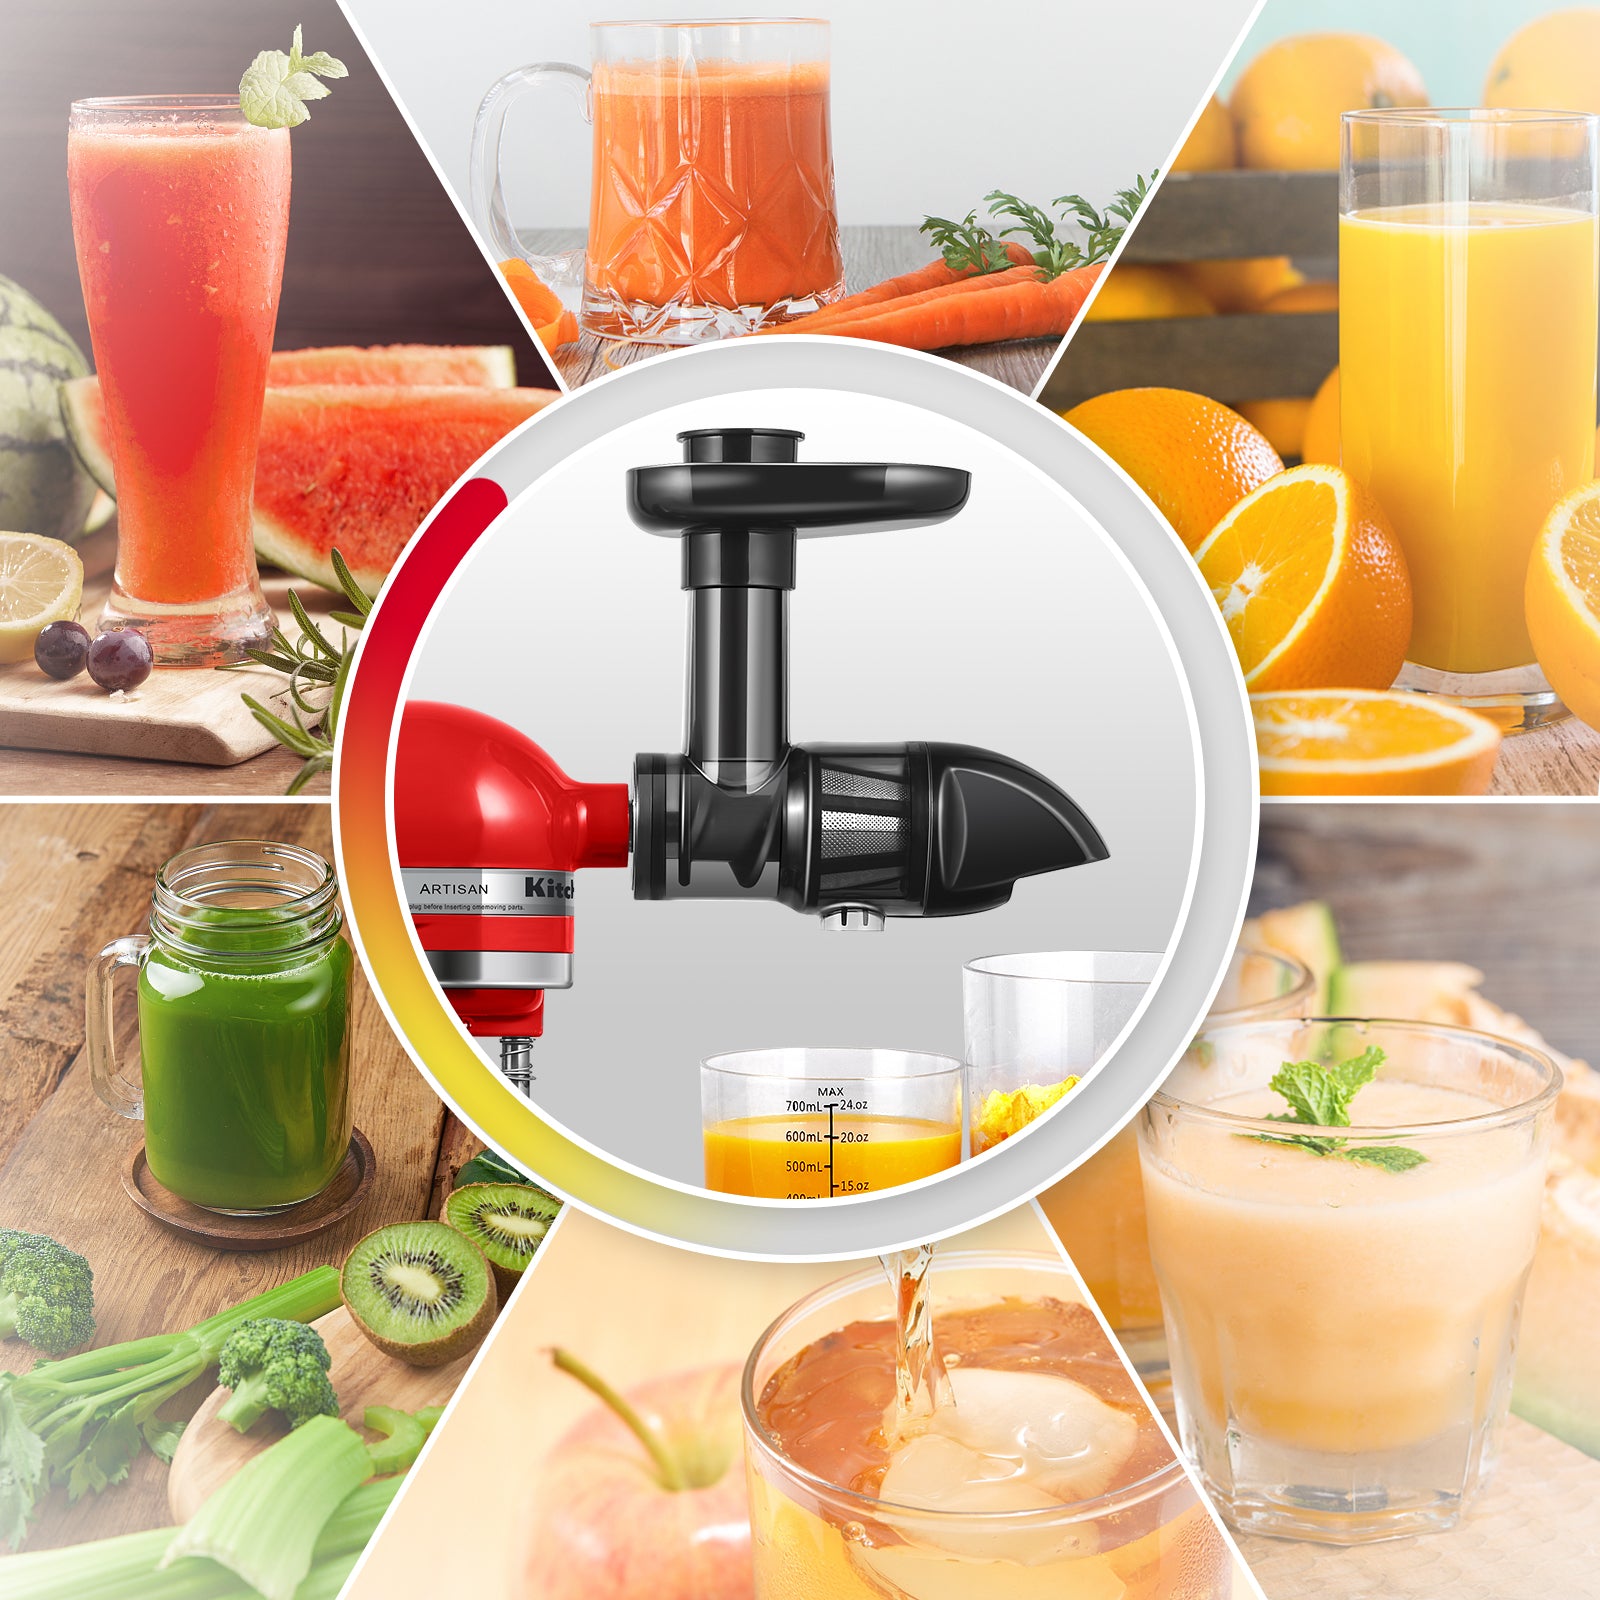 Masticating Juicer Attachment for KitchenAid All Models Stand  Mixers,AMZCHEF Masticating Juicer, Slow Juicer Attachment for All  KitchenAid Mixers